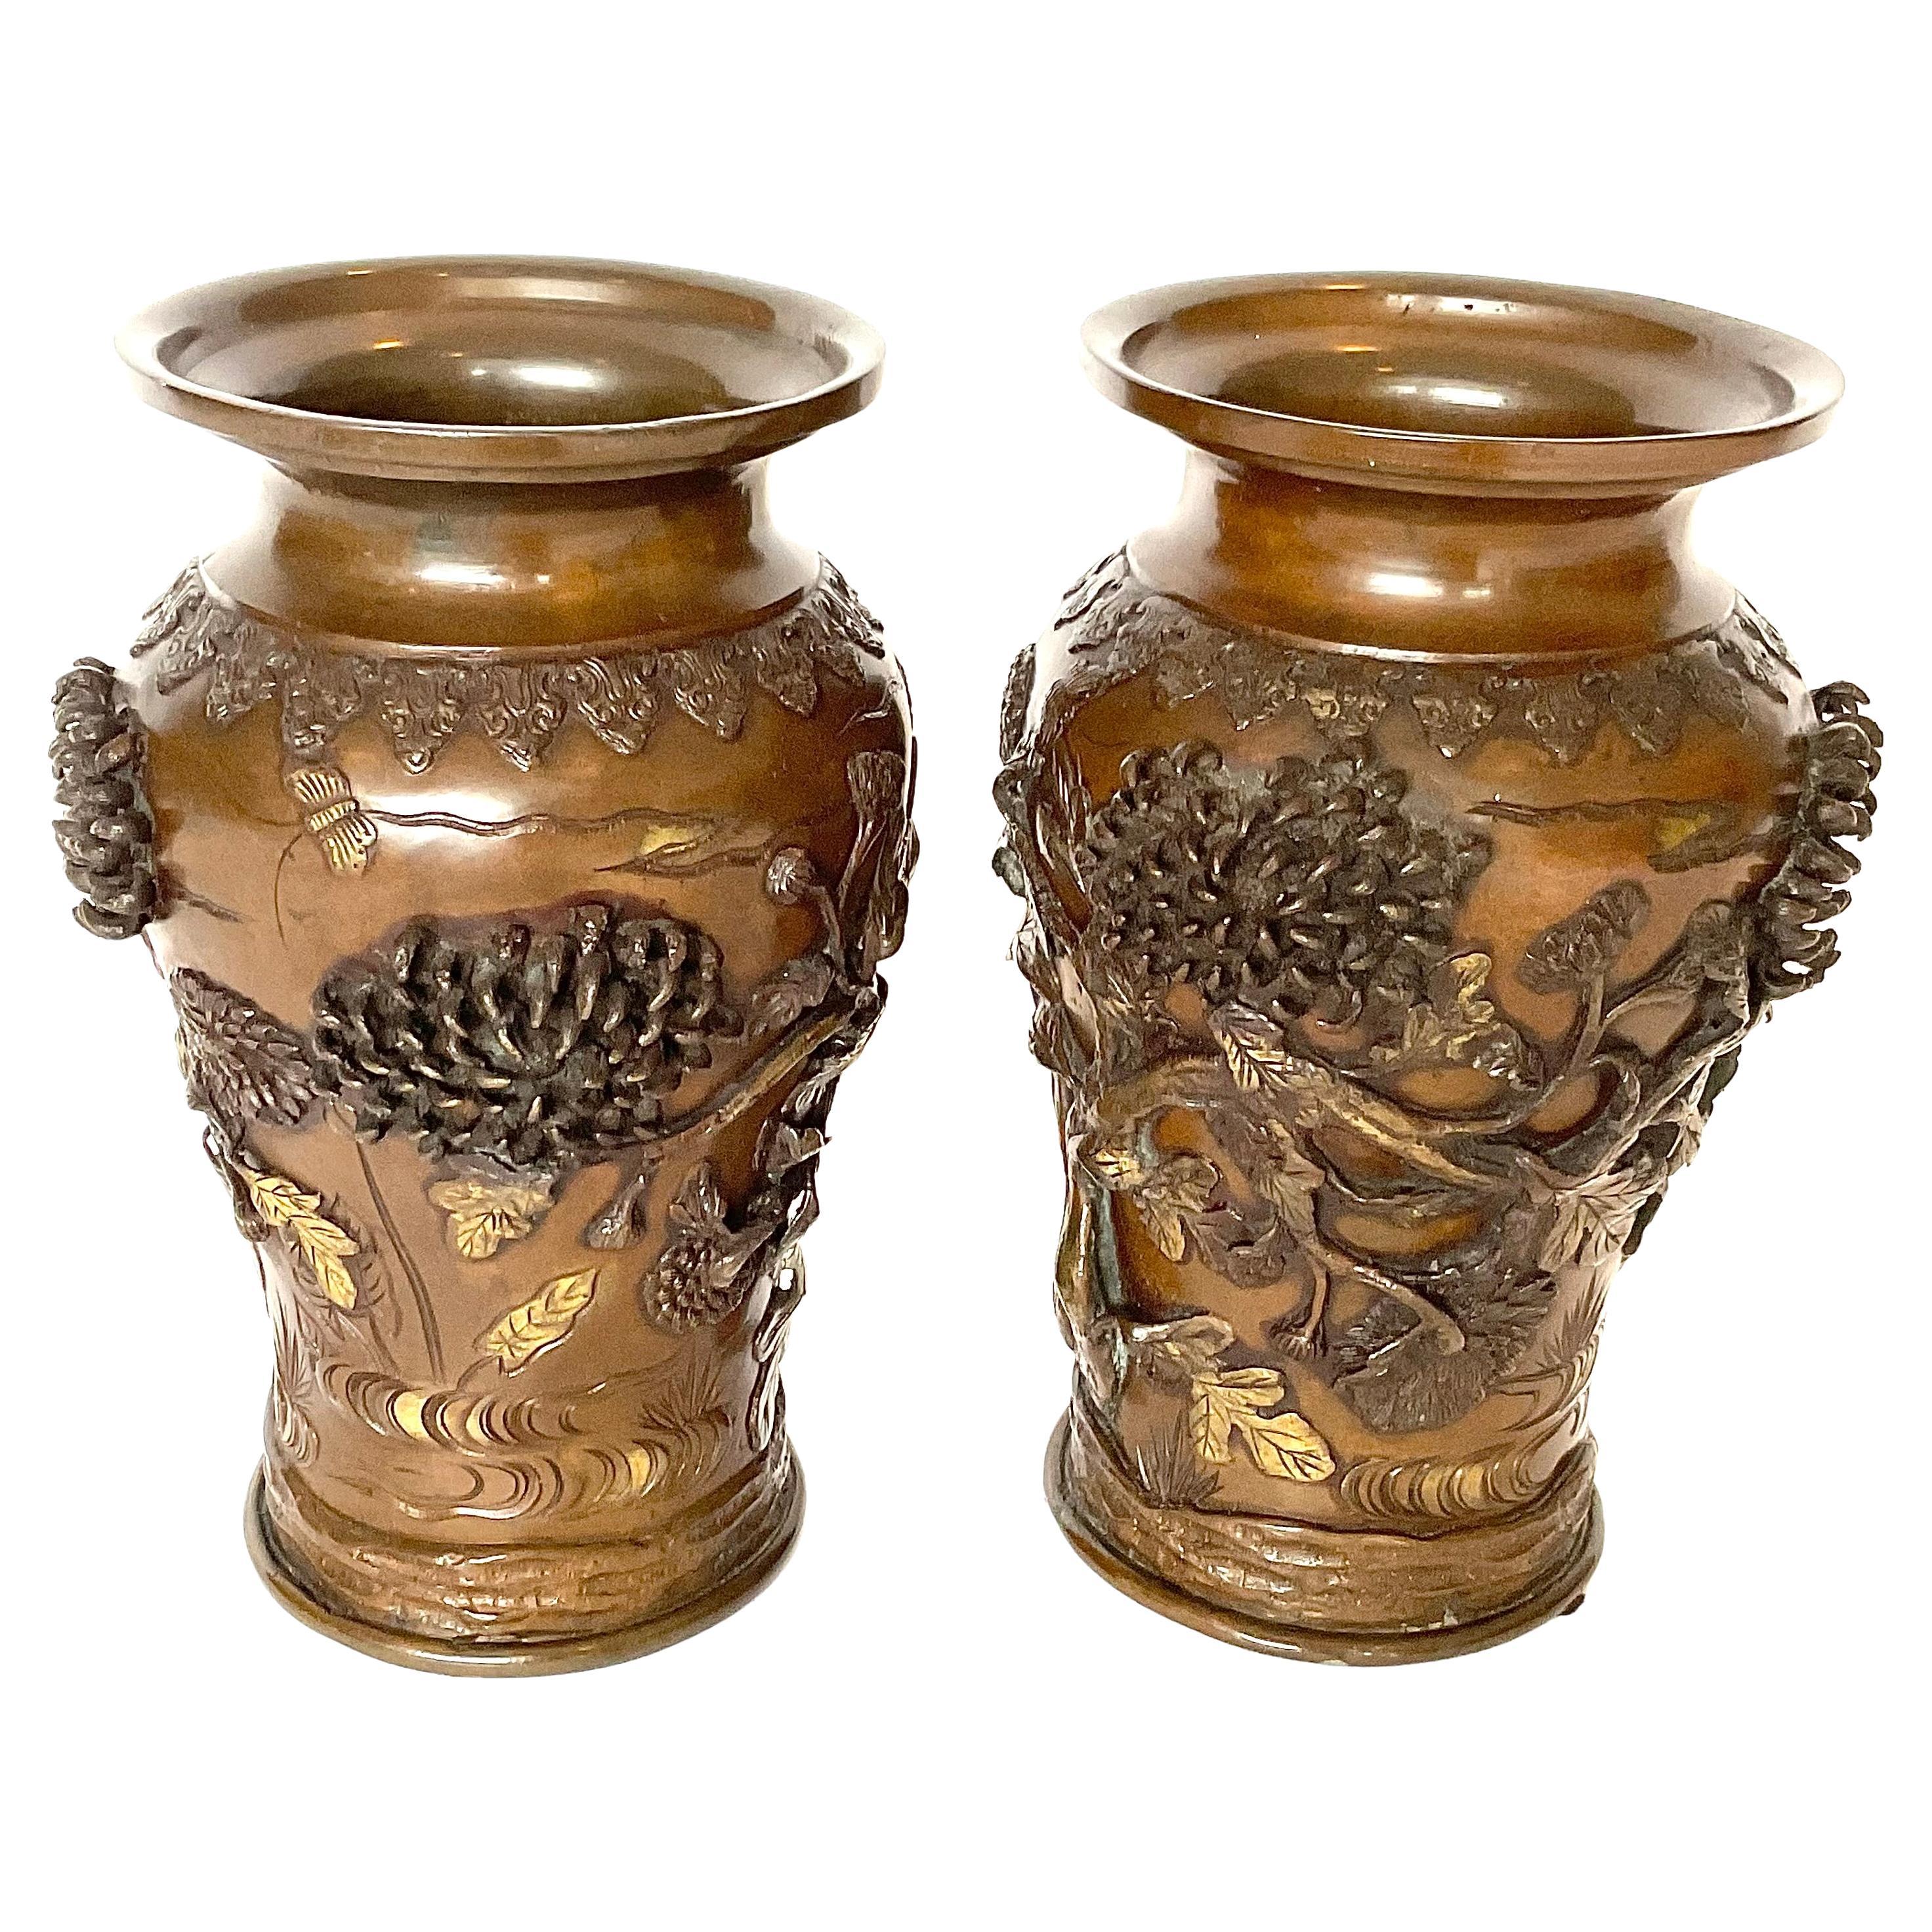 PAIR Amazing Japanese Artist Signed Bronze vases gold accents 19th Century Meiji